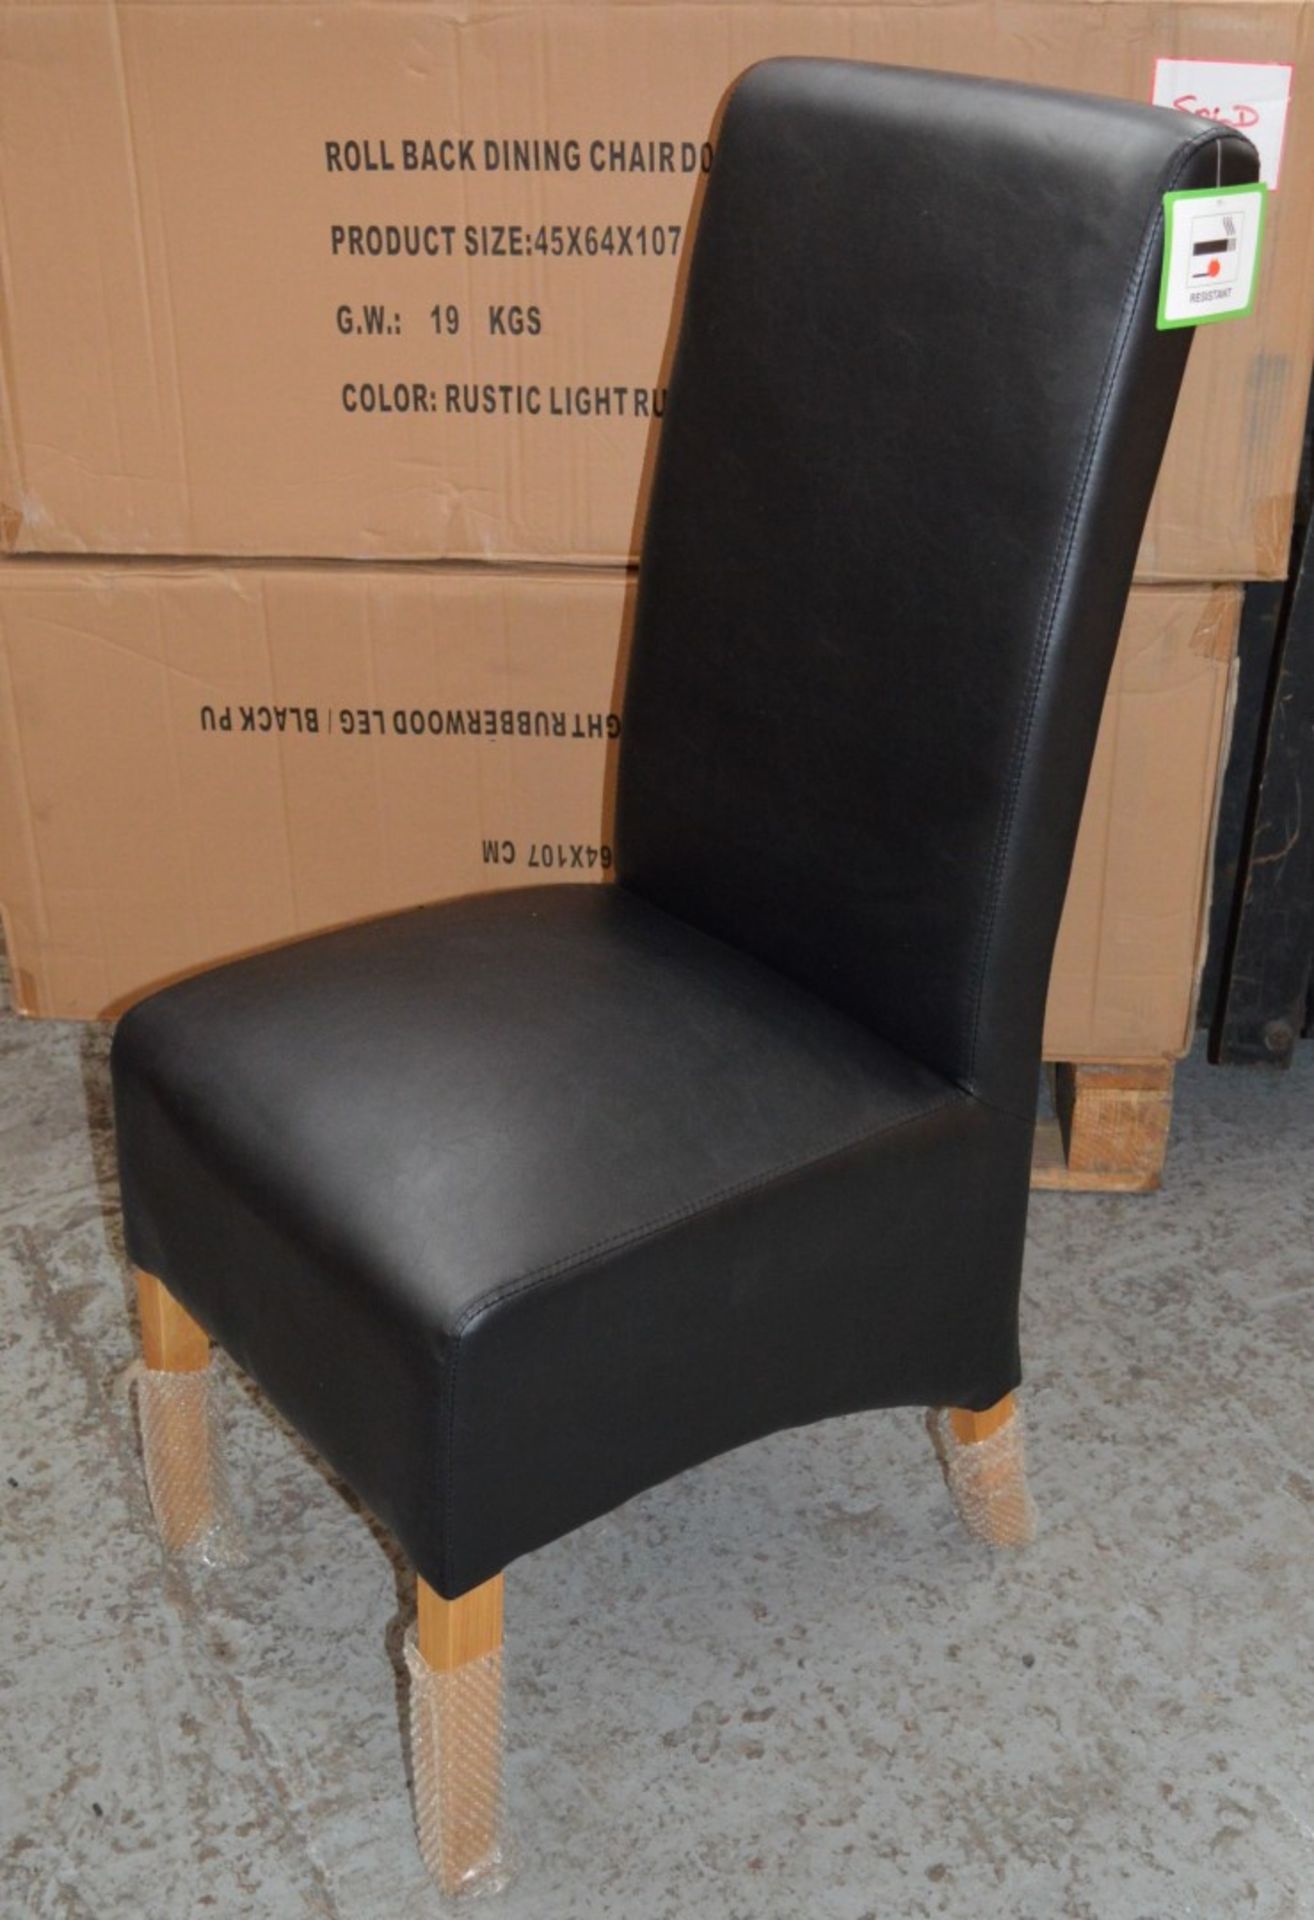 2 x Black Faux Leather Dining Chairs - Seating Dimensions: W44 x D60 x Height 106cm, Seat Height 47c